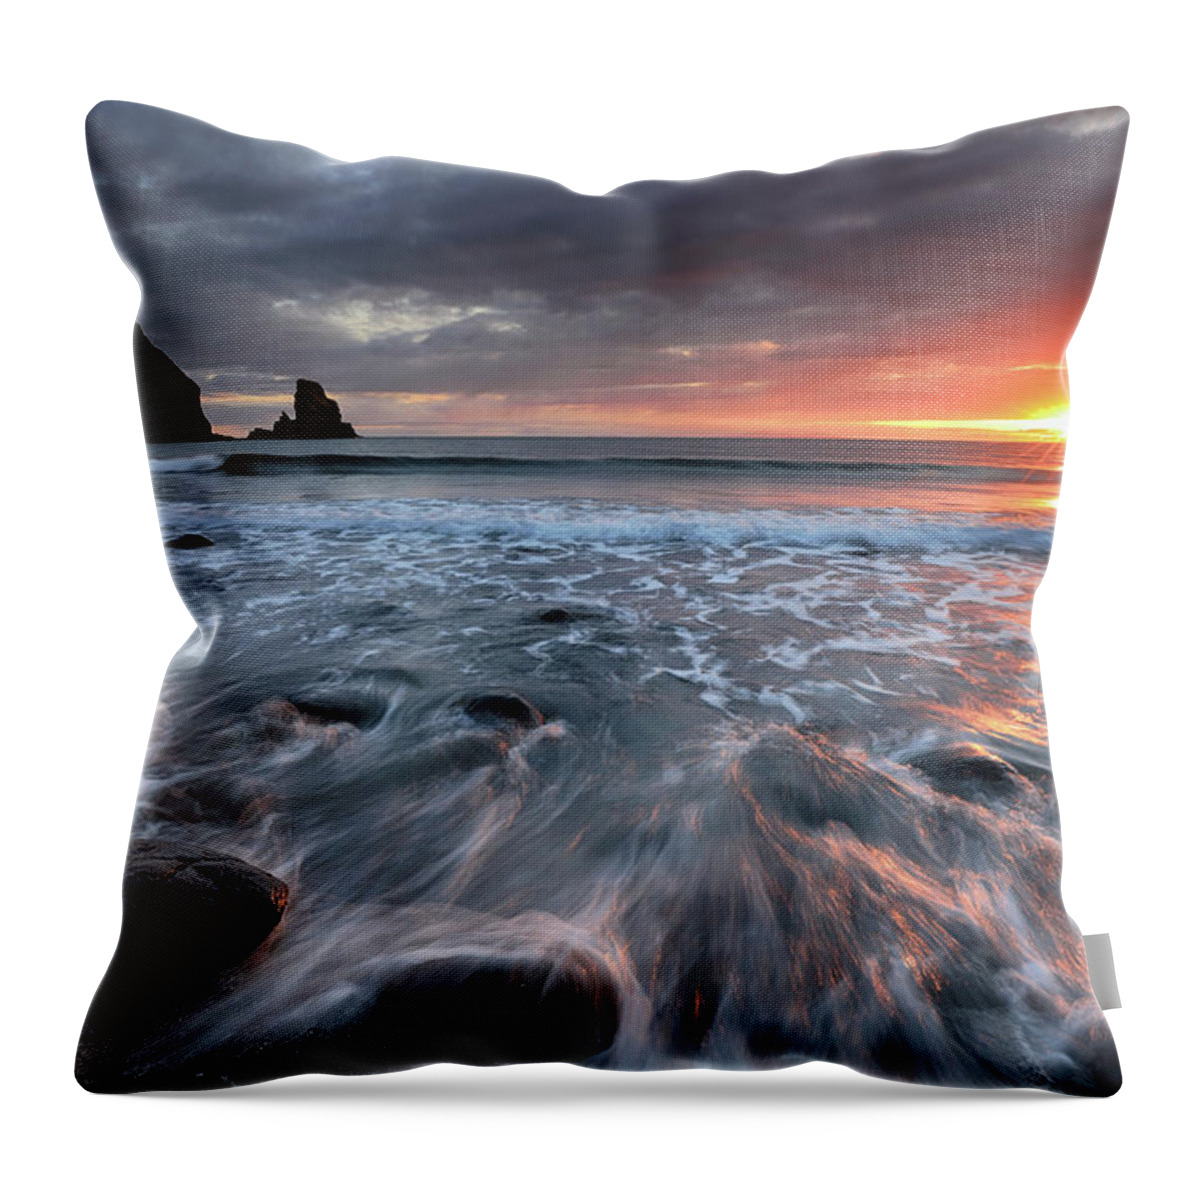 Talisker Bay Throw Pillow featuring the photograph Talisker Bay Rocky Sunset by Grant Glendinning